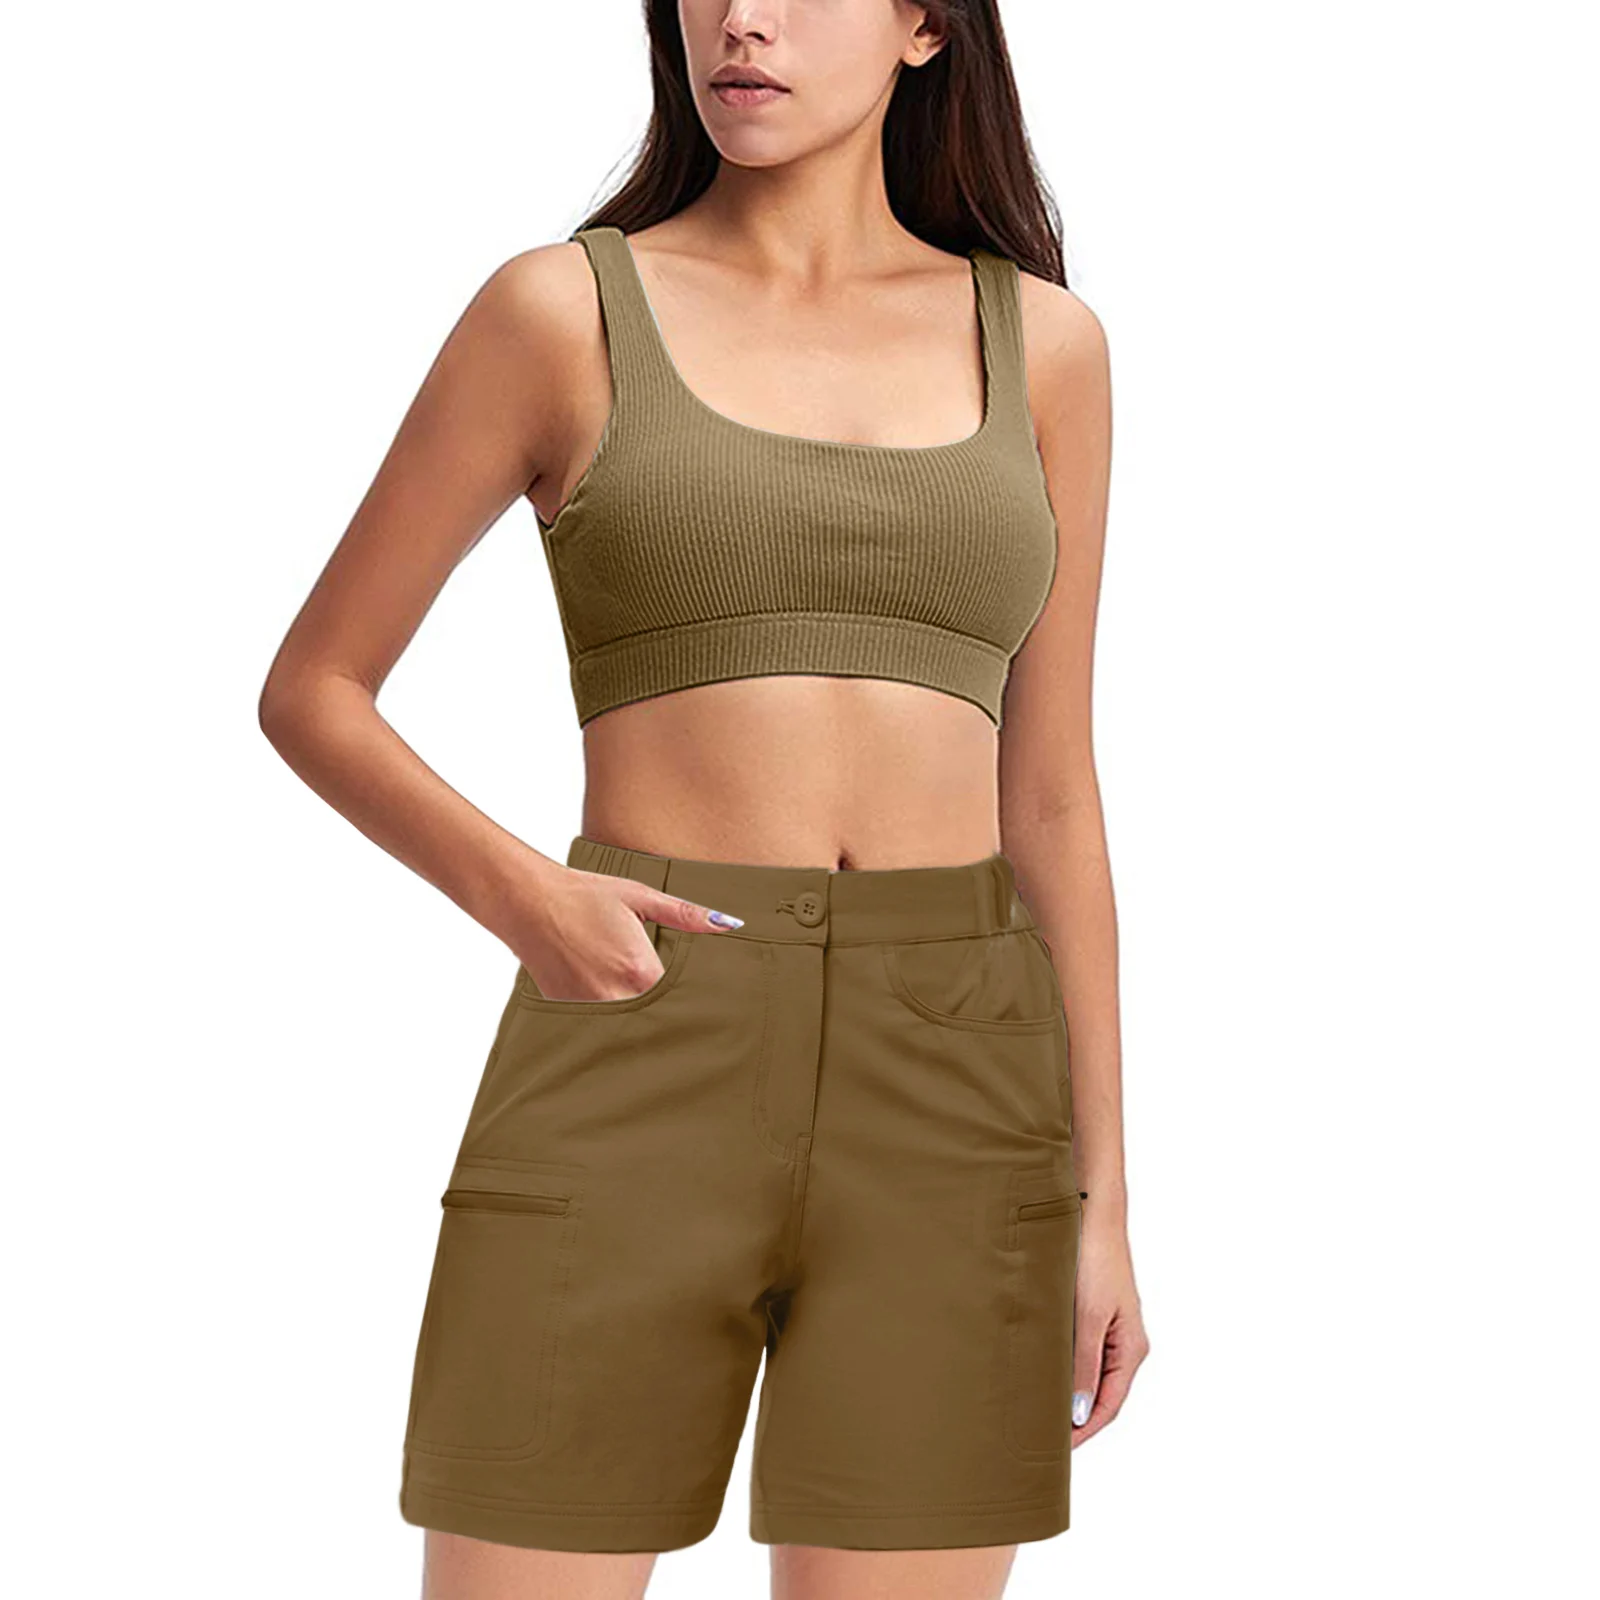 Women Summer Casual Shorts 2021 New Style Fashion Solid Color Side Pockets Zipper Cargo Short Pants for Women High Waist Shorts soffe shorts